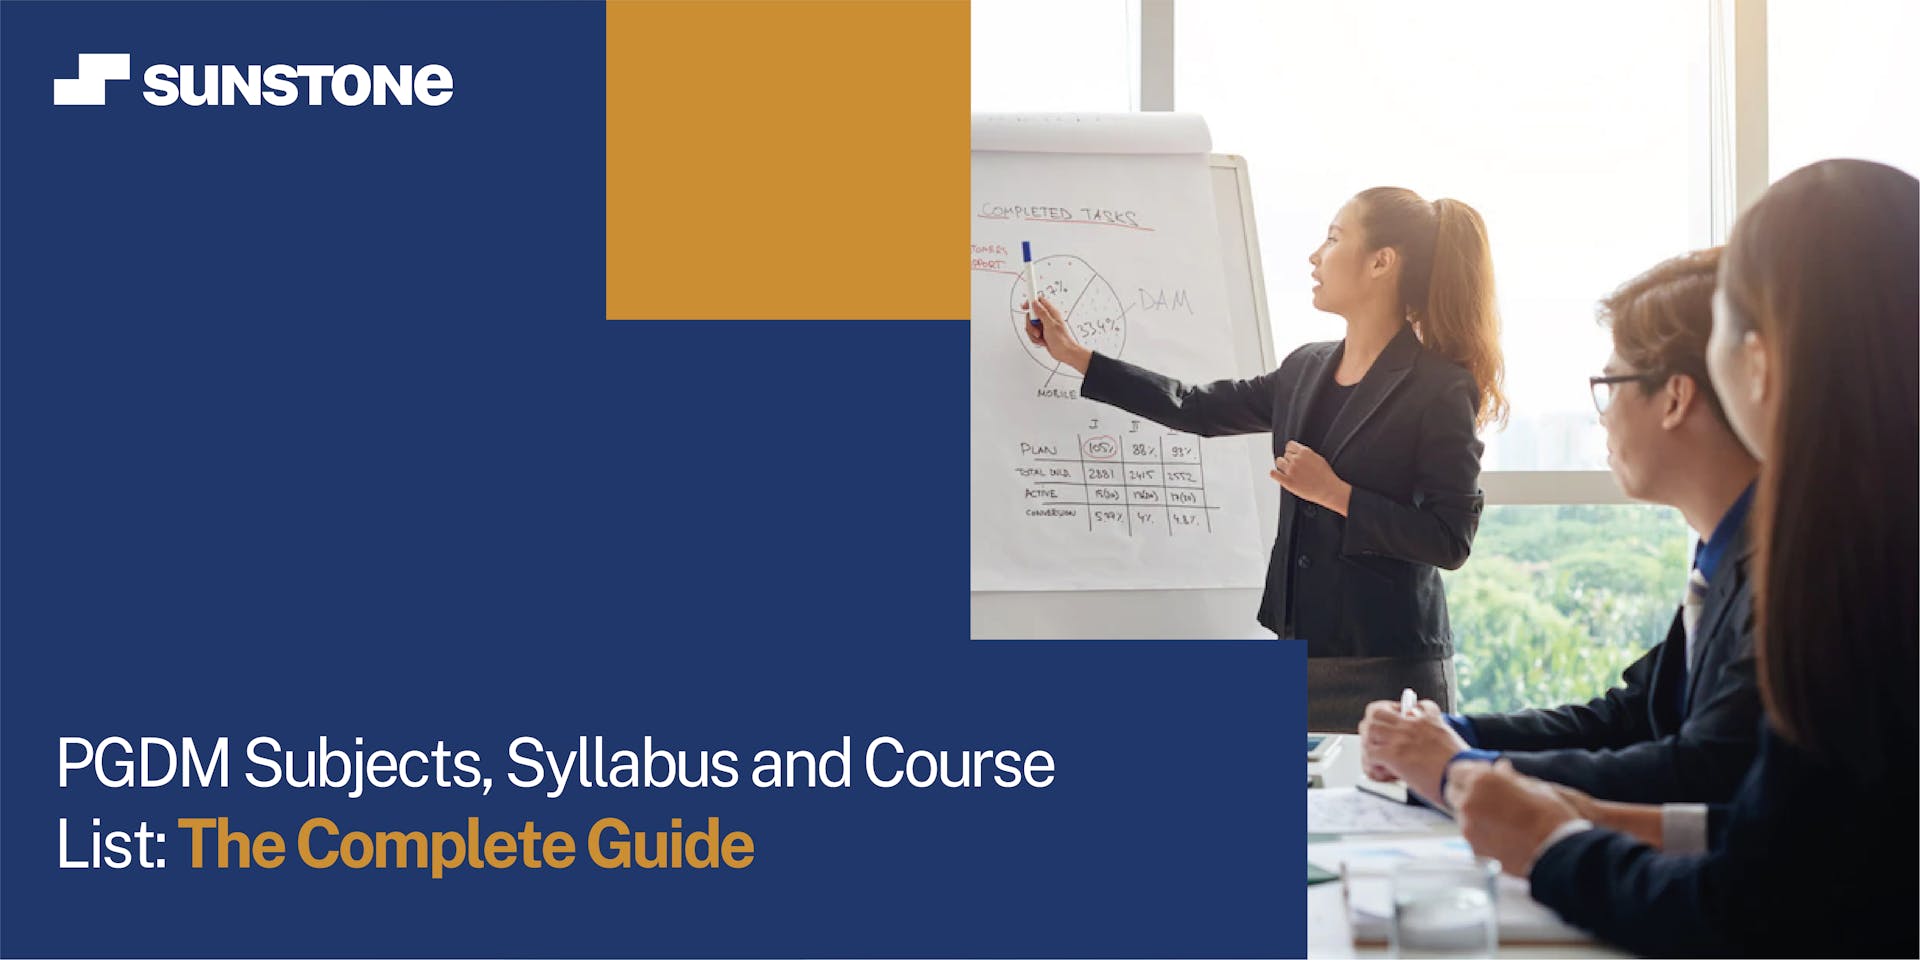 PGDM Subjects, Syllabus, and Course List: The Complete Guide